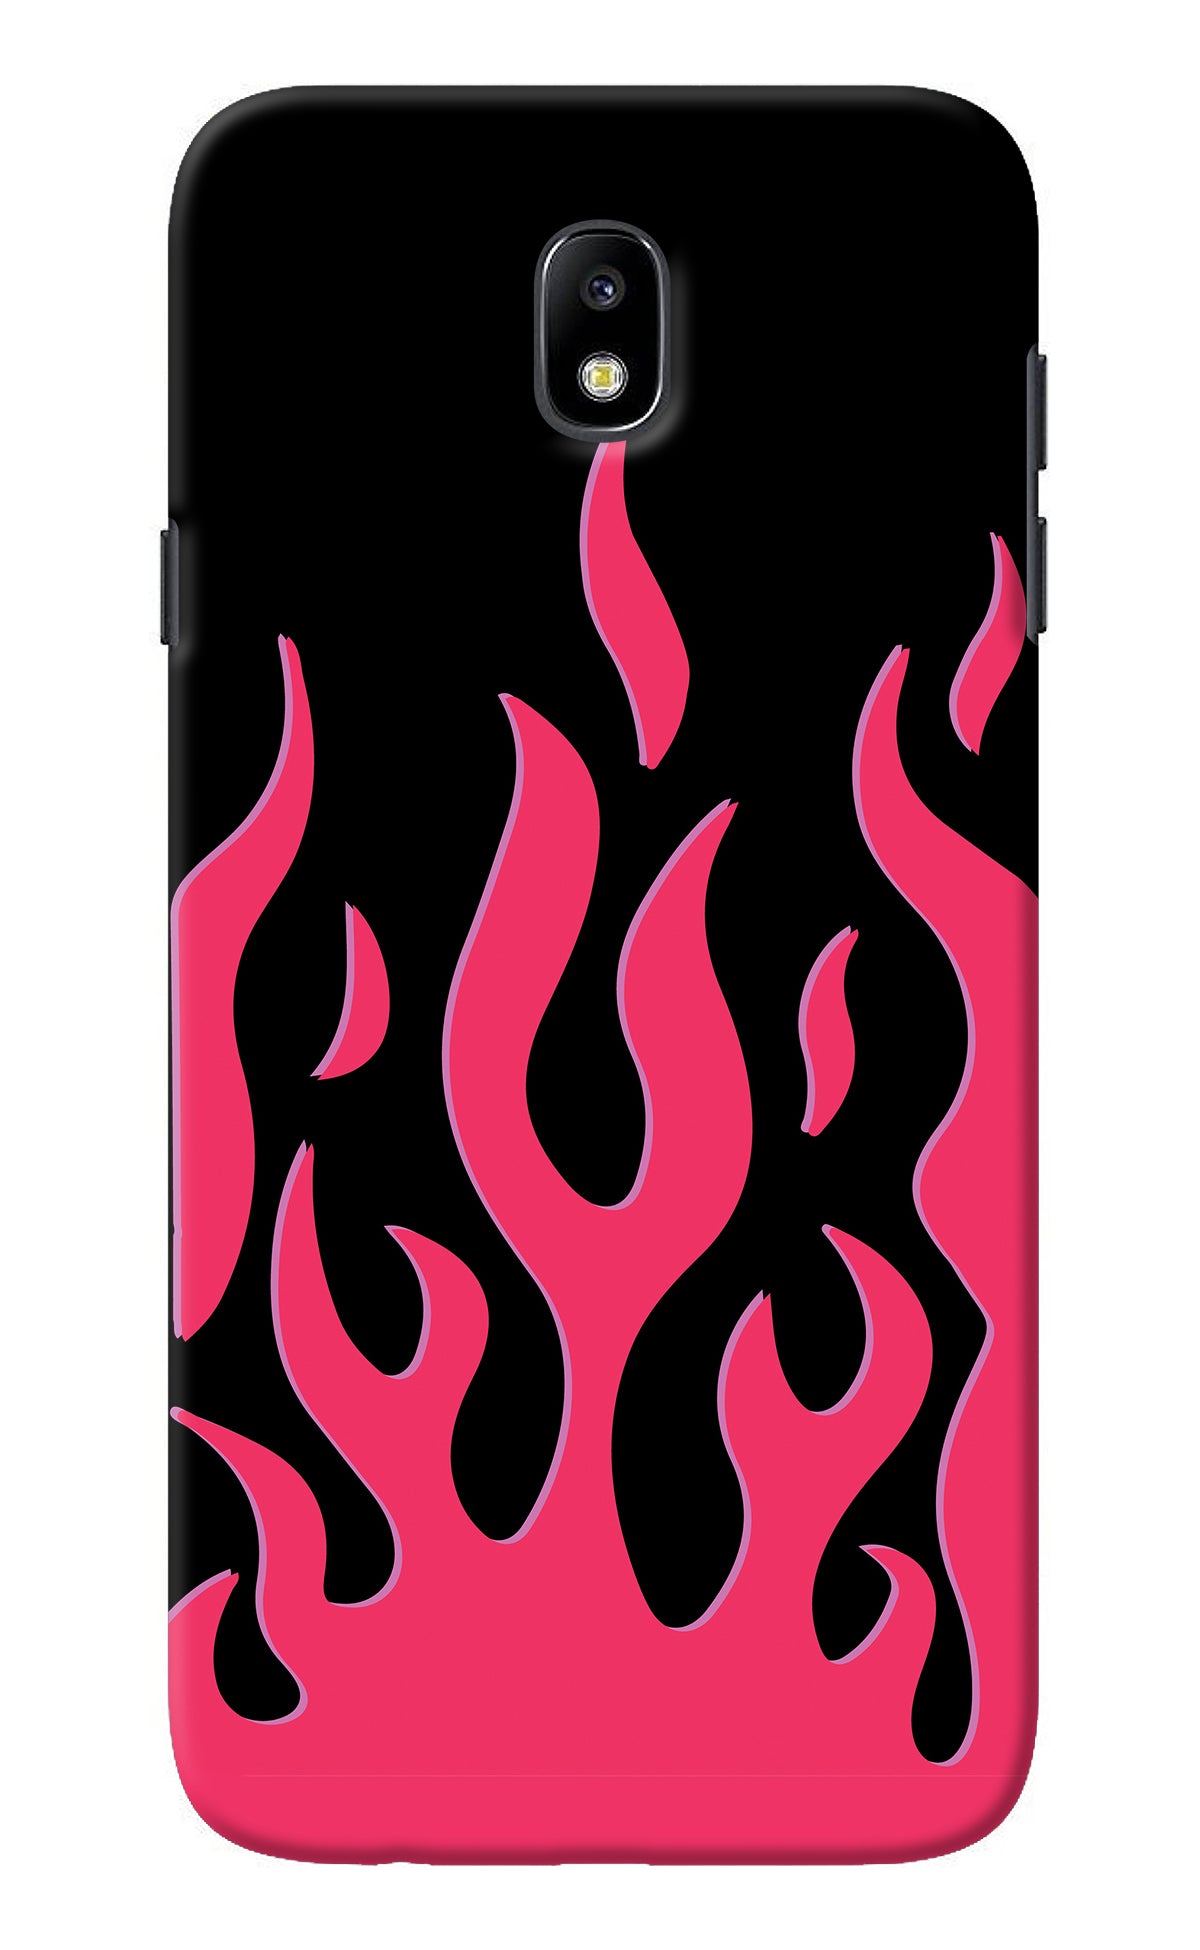 Fire Flames Samsung J7 Pro Back Cover